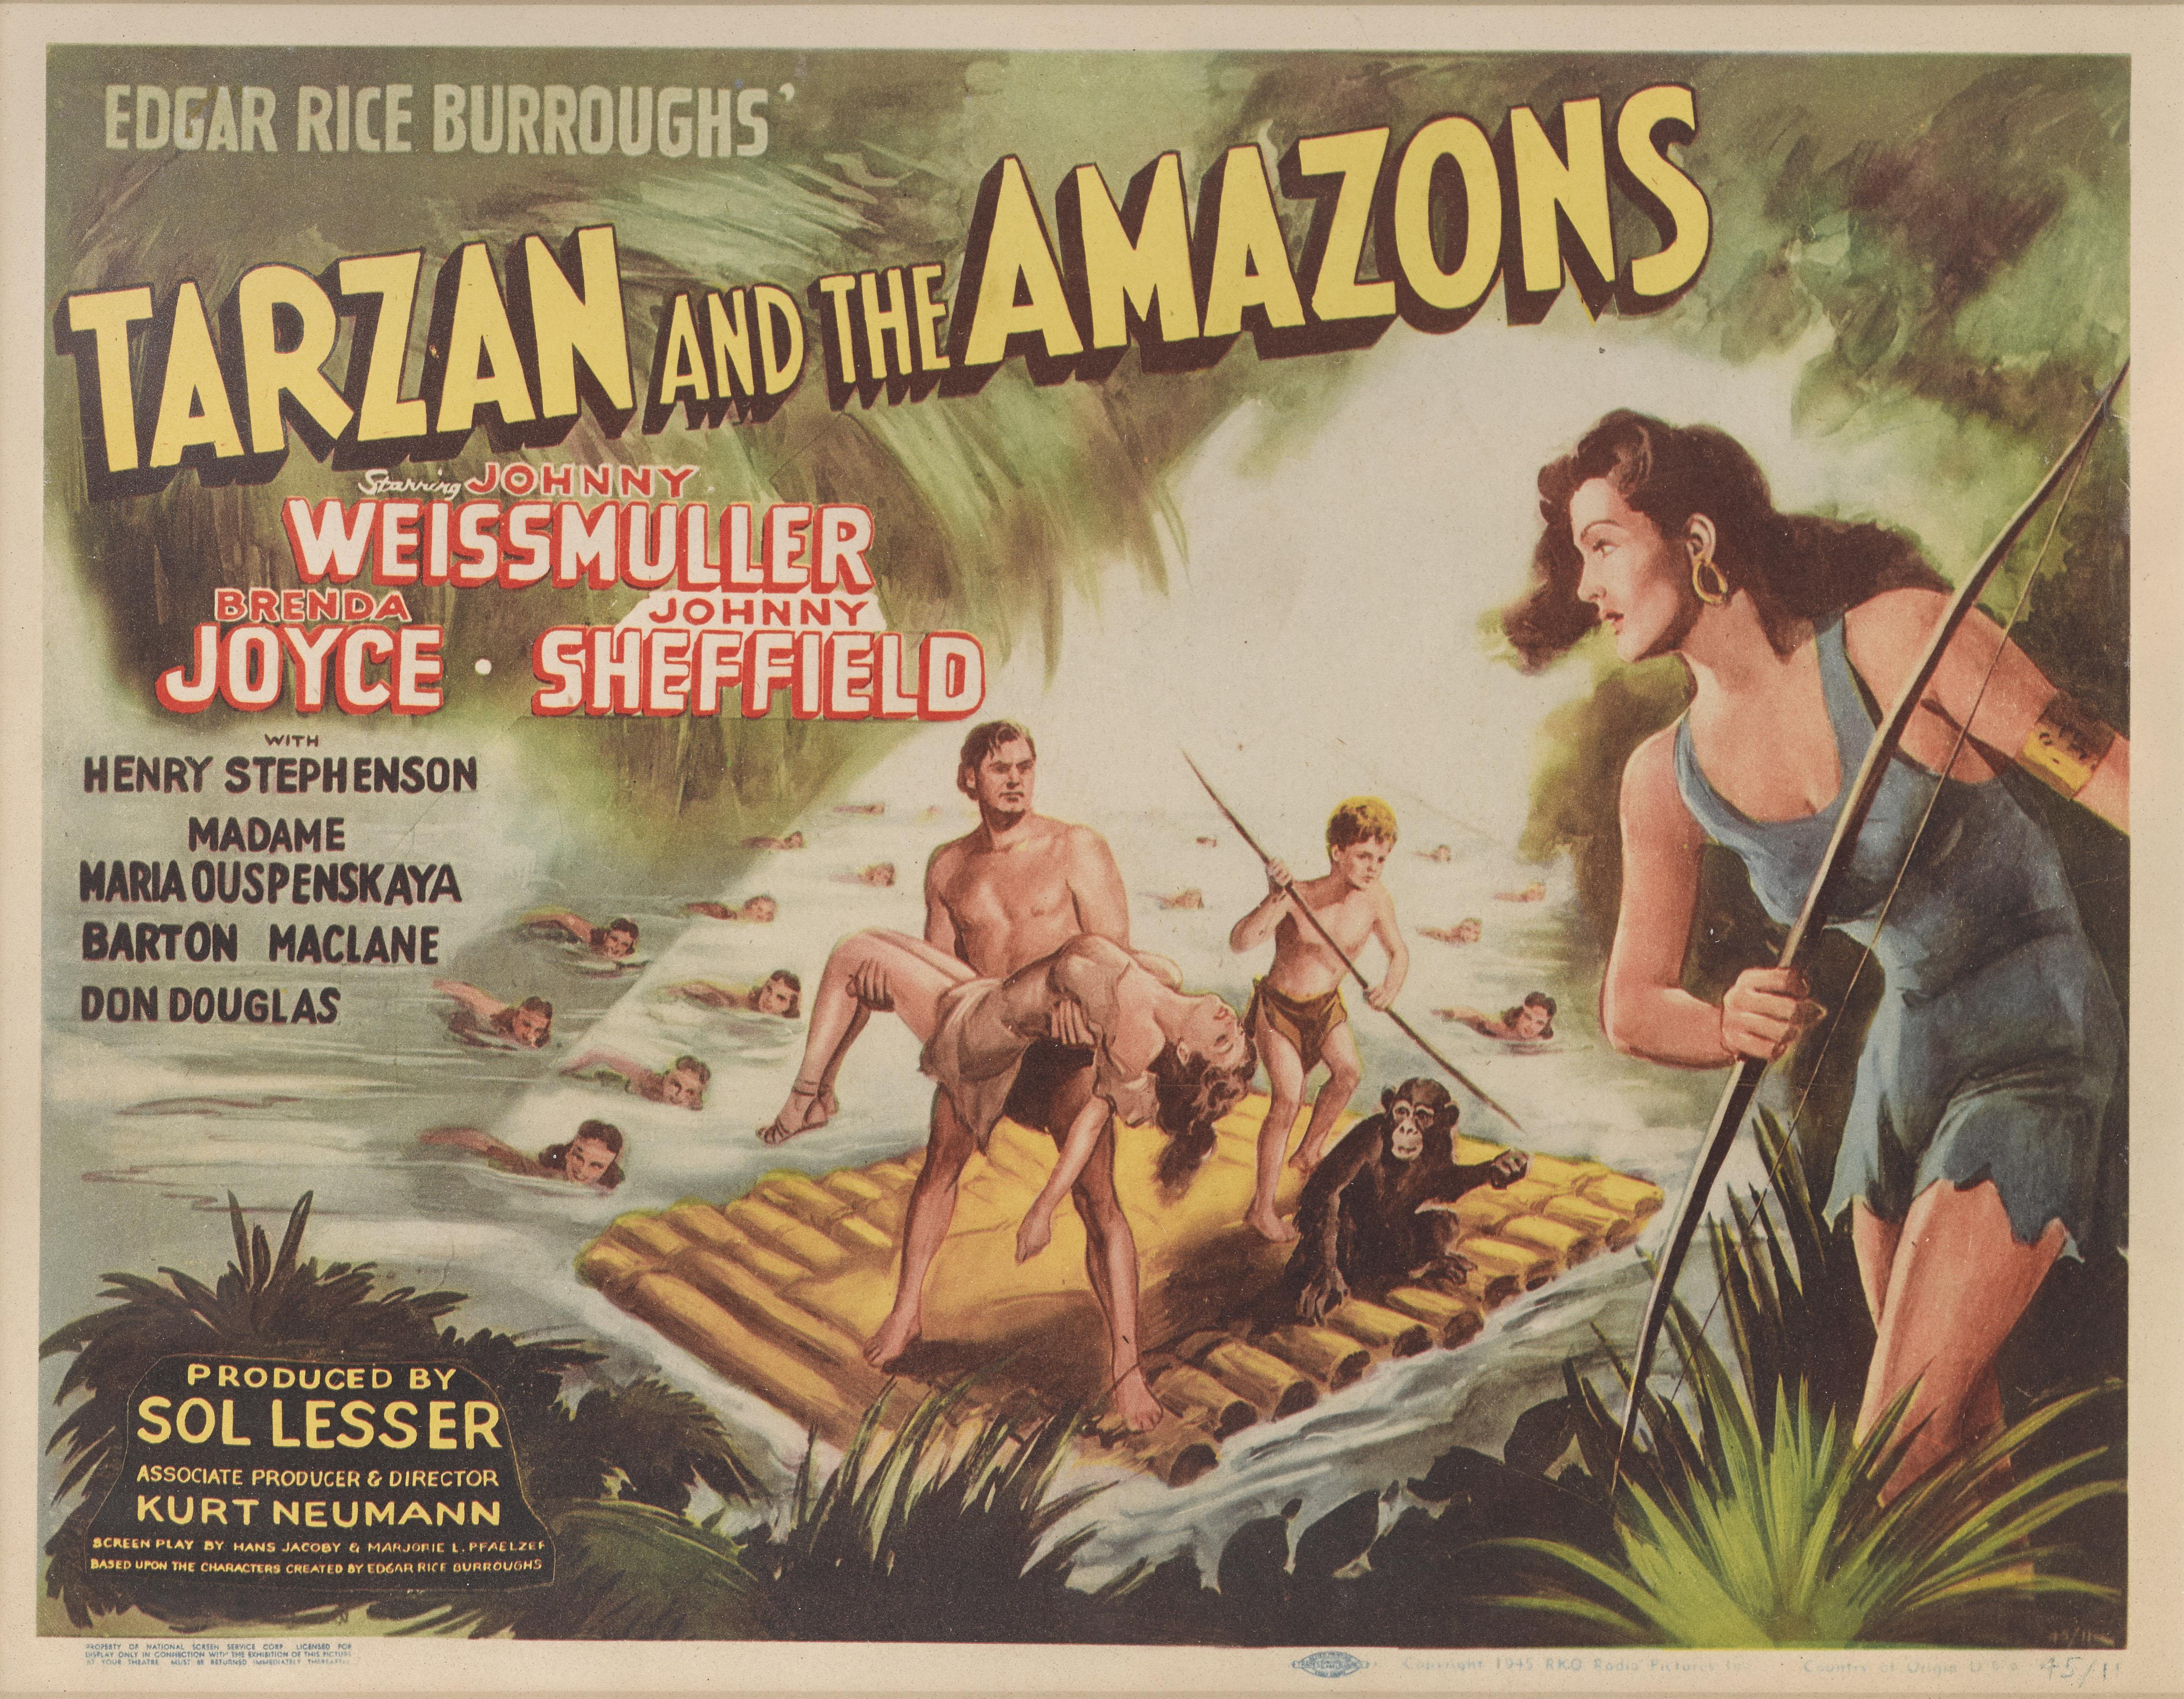 Original US Lobby card for Tarzan and the Amazons 1945 
This action advenure film starred Jonny Weissmuller and Brenda Joyce. The film was directed by Kurt Neumann. This is the Best card from the set of 8 lobby cards.
This Lobby card is